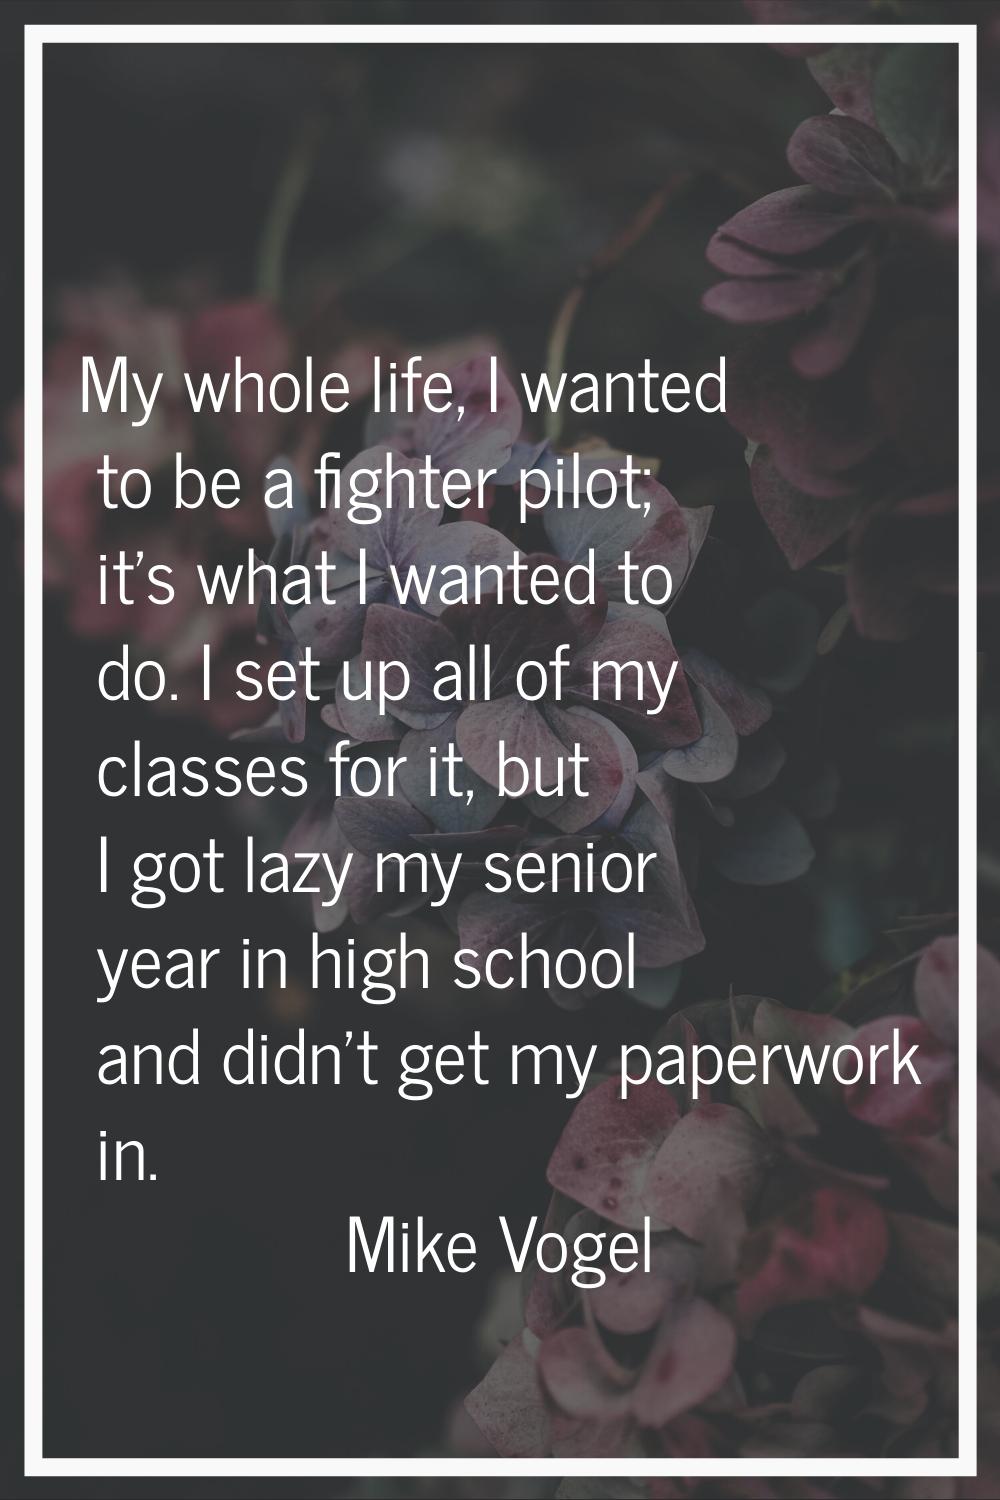 My whole life, I wanted to be a fighter pilot; it's what I wanted to do. I set up all of my classes